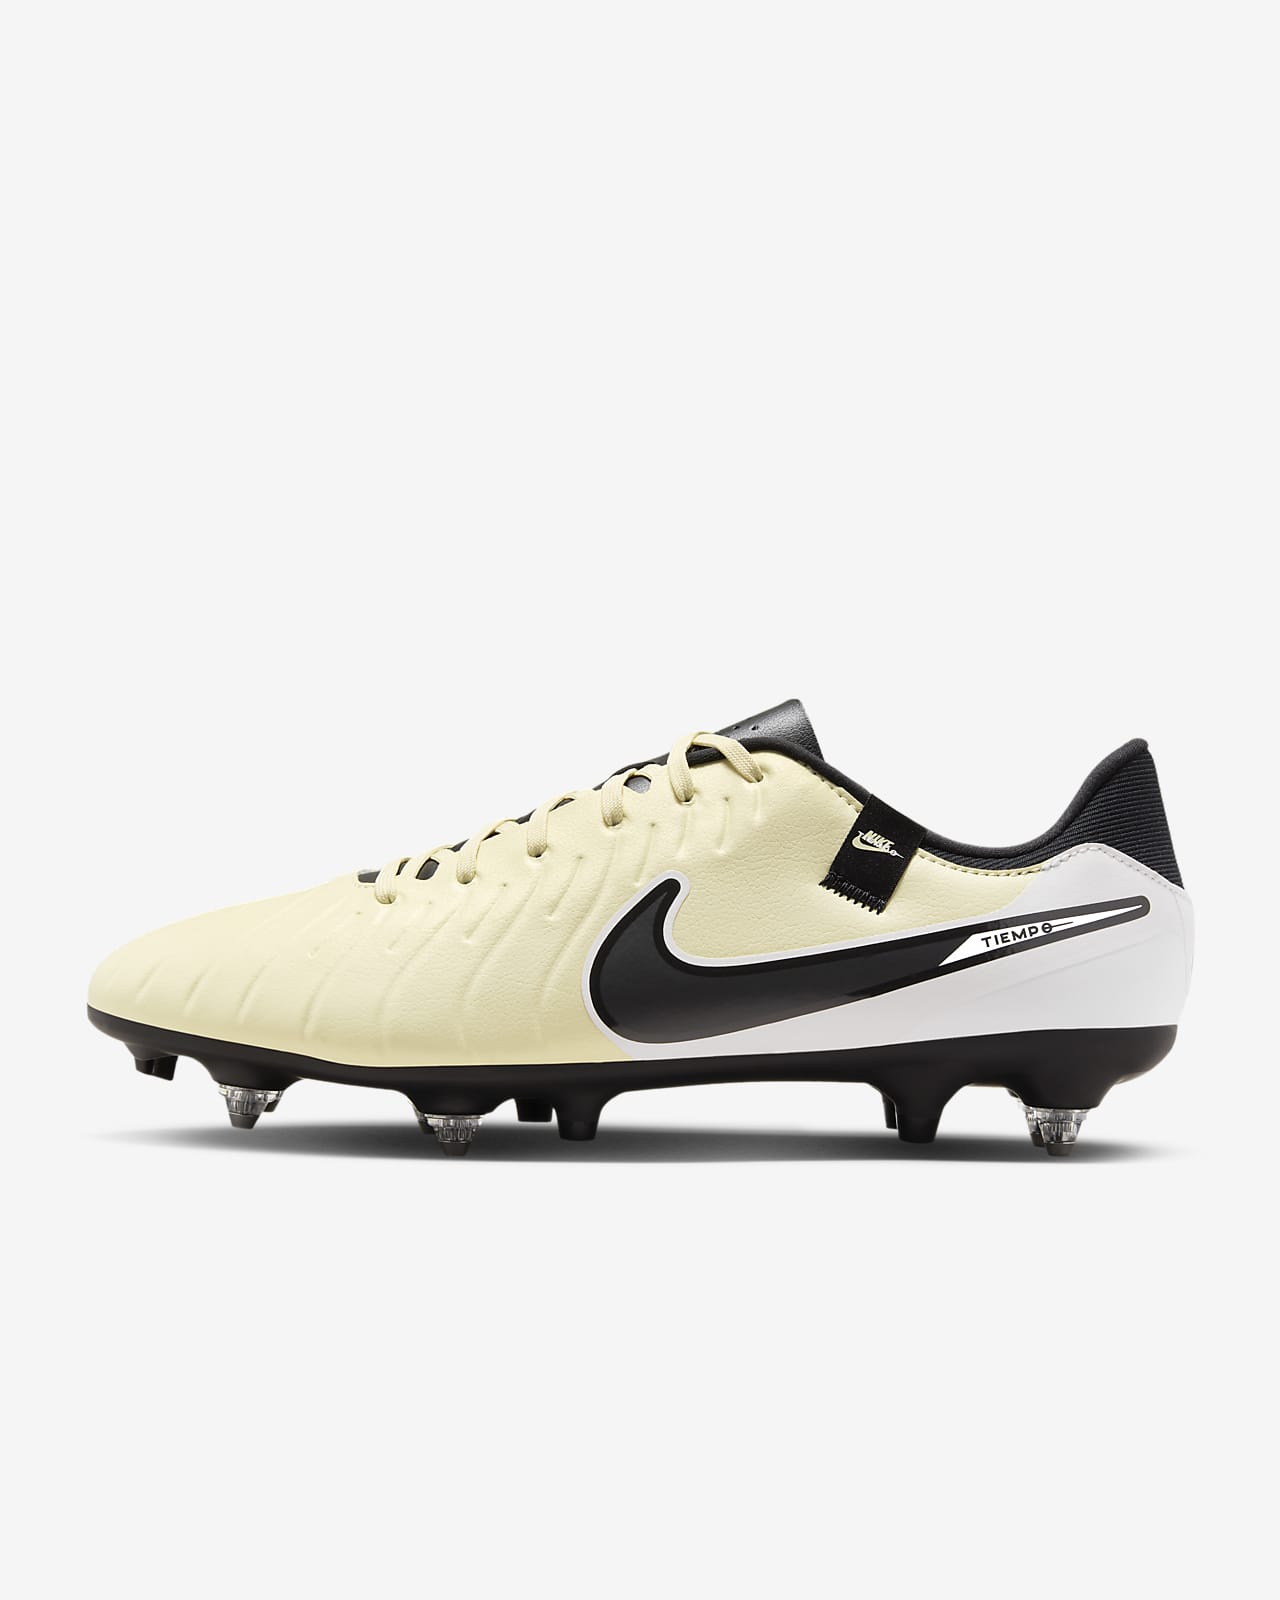 Nike Tiempo Legend 10 Academy Soft-Ground Low-Top Football Boot